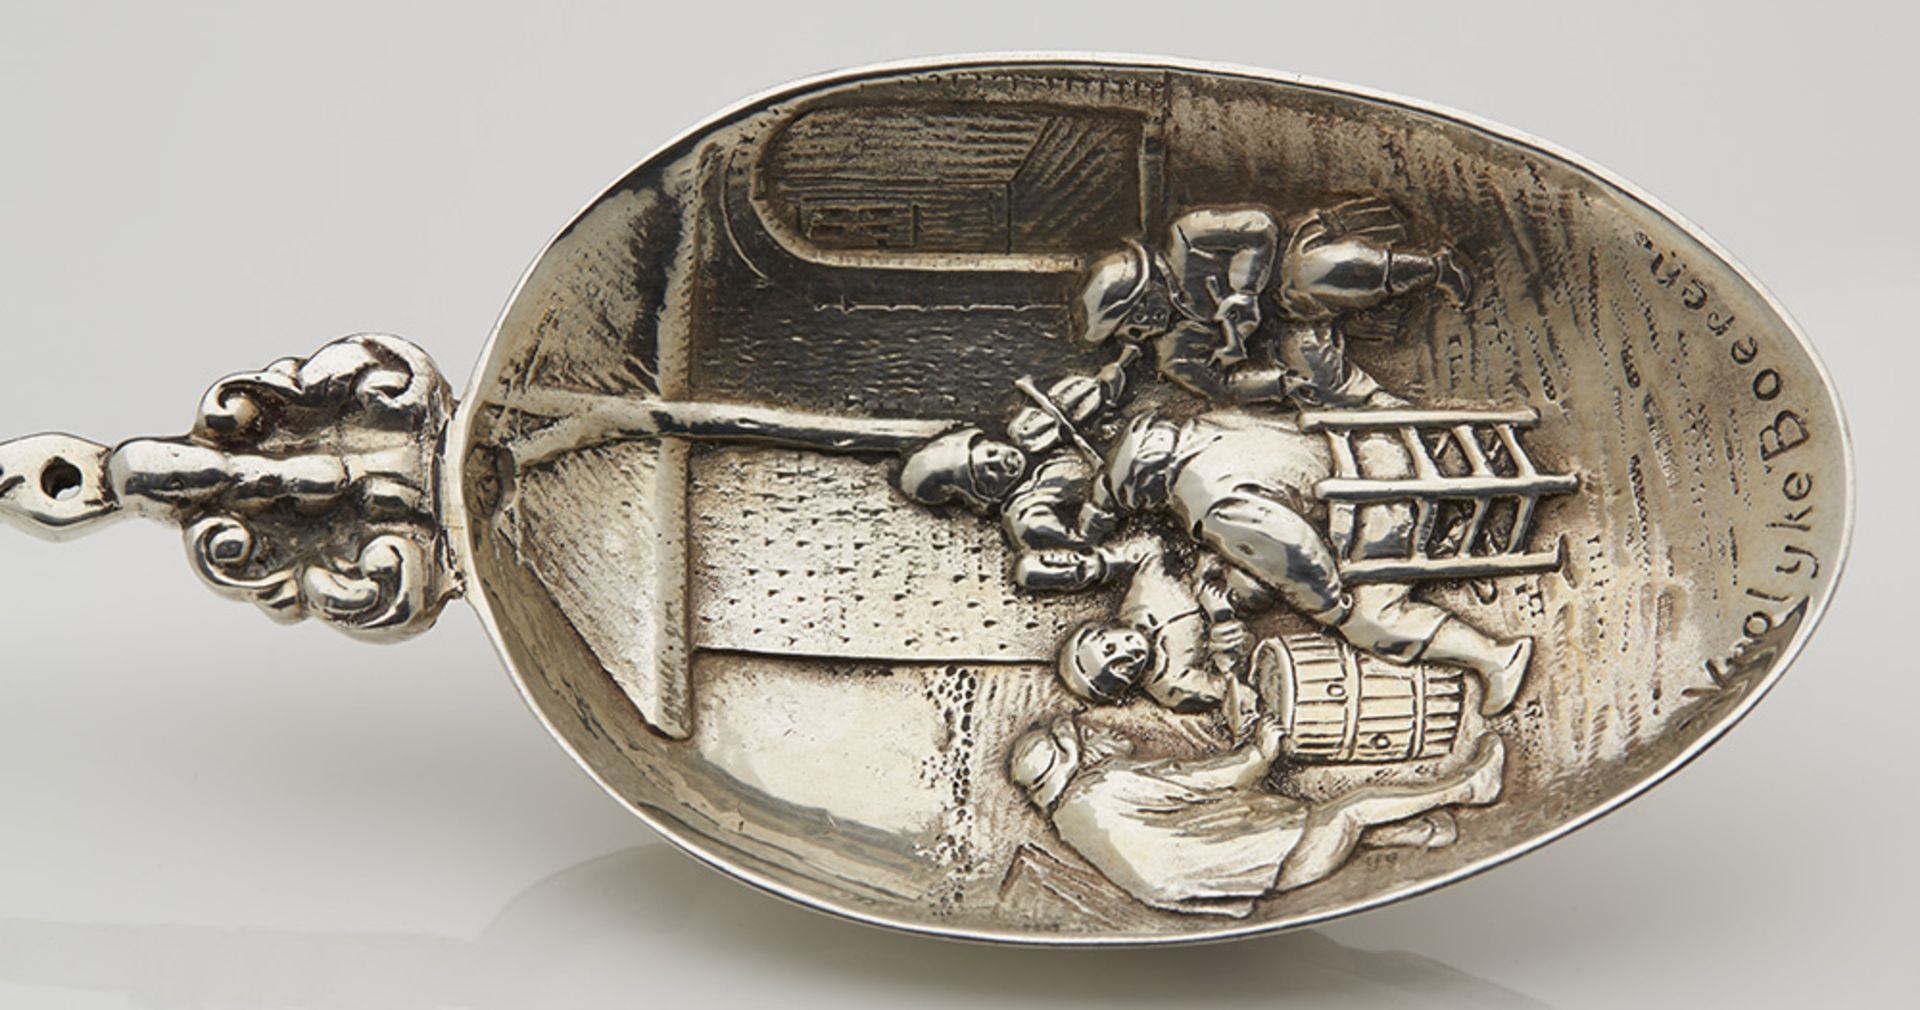 Fine Antique Dutch Silver Happy Farmers Presentation Spoon With Figural Bowl 19Th C. - Image 3 of 7